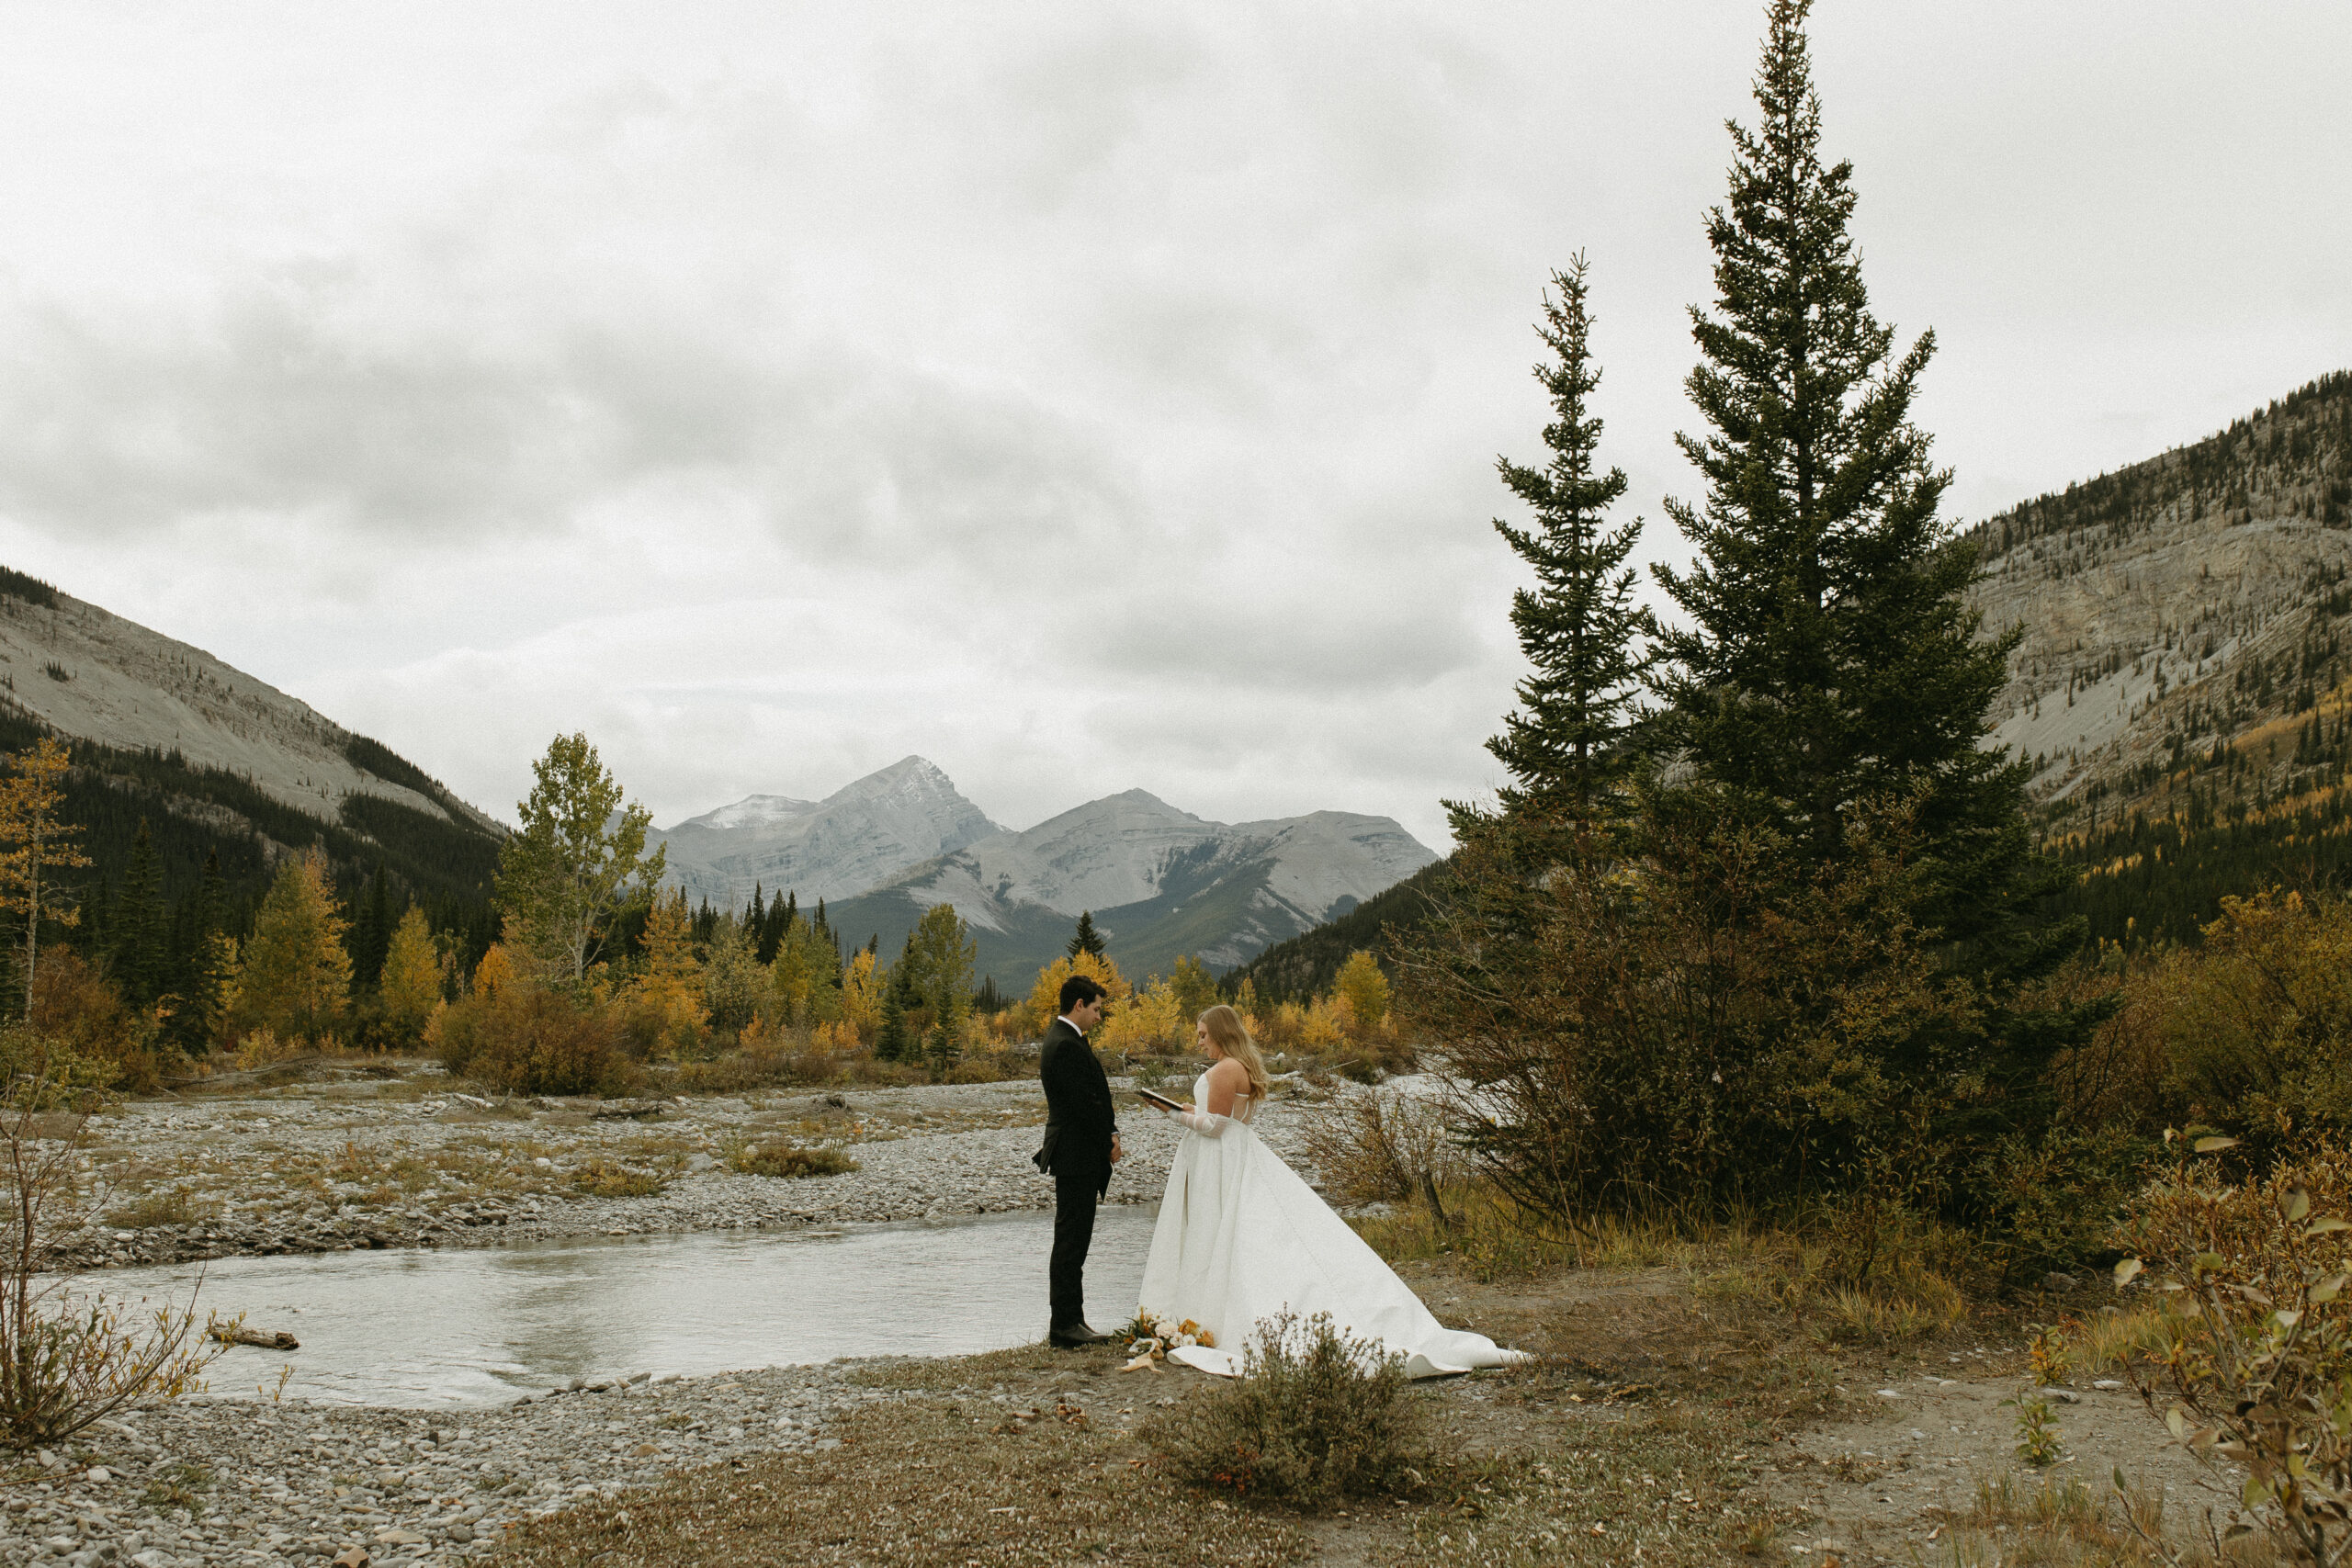 couple shares private vows in nature for their Bragg Creek wedding